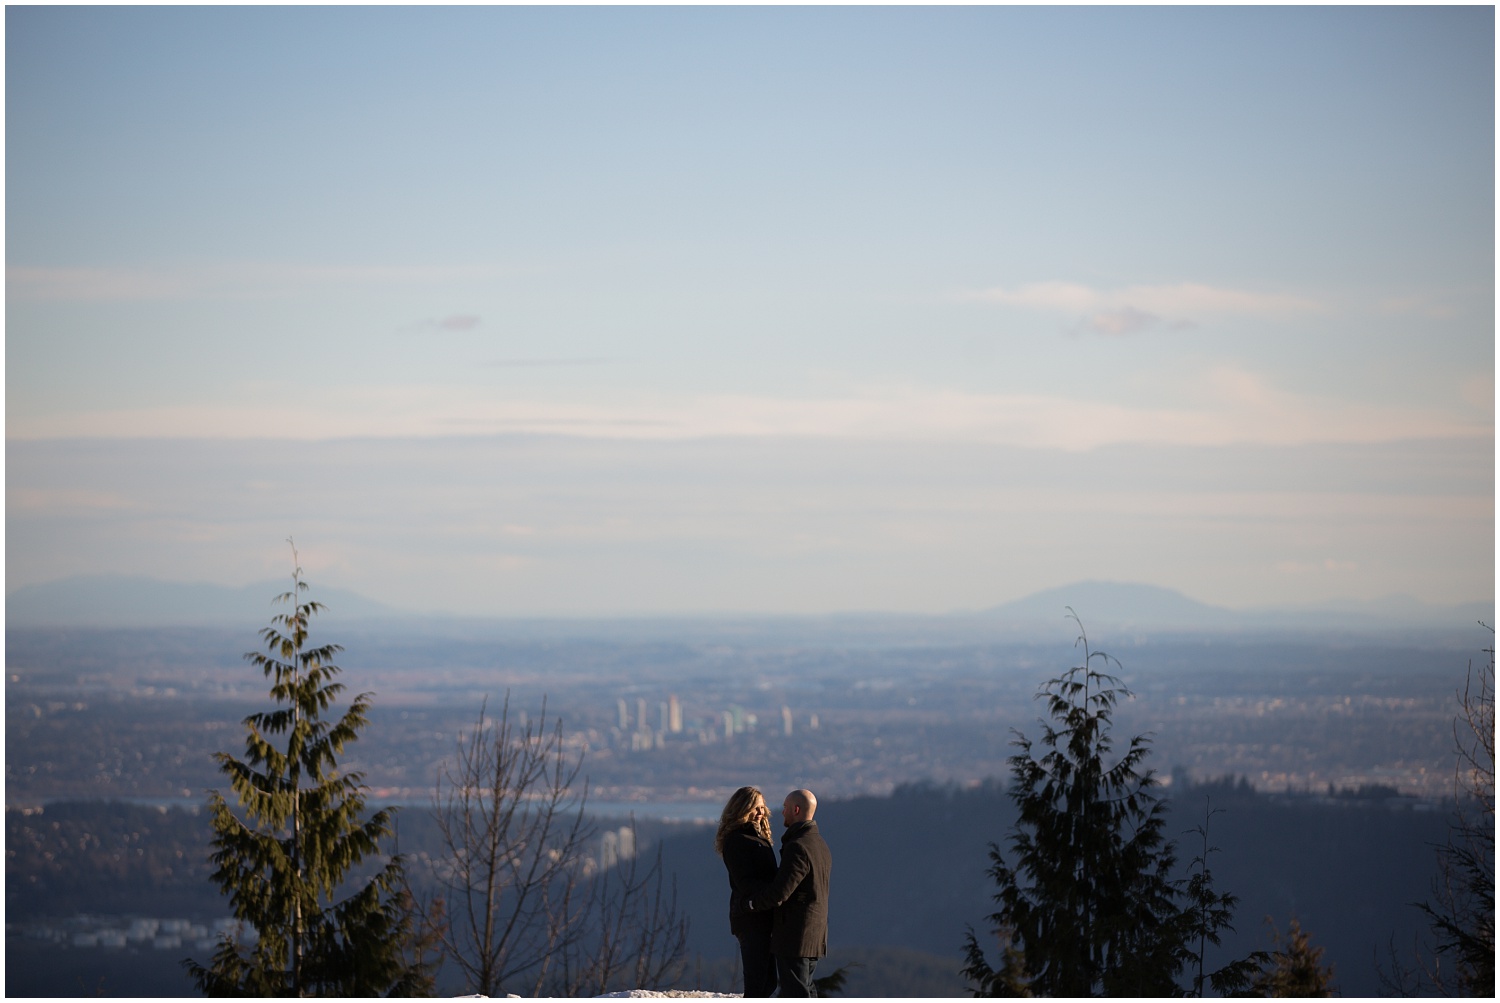 Amazing Day Photography - Langely Wedding Photographer - Snow Engagement Session - Mount Seymour Engagement - Winter Engagement Session - North Vancouver Engagement Session  (7).jpg